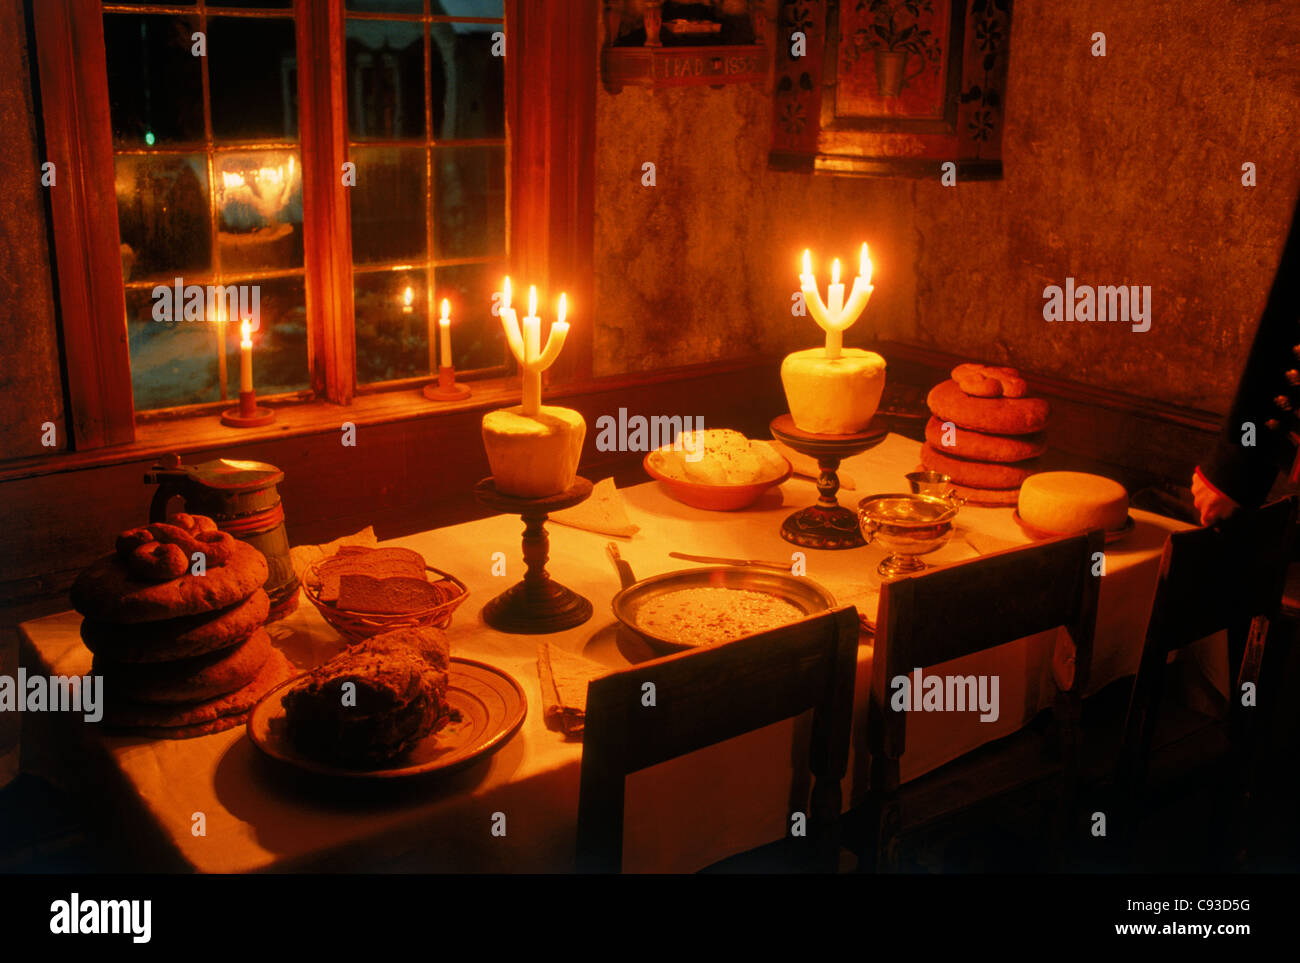 Old Swedish Christmas table or julbord from 1850s at Skansen in Stockholm with cheese, baked bread, roast ham, and candles Stock Photo